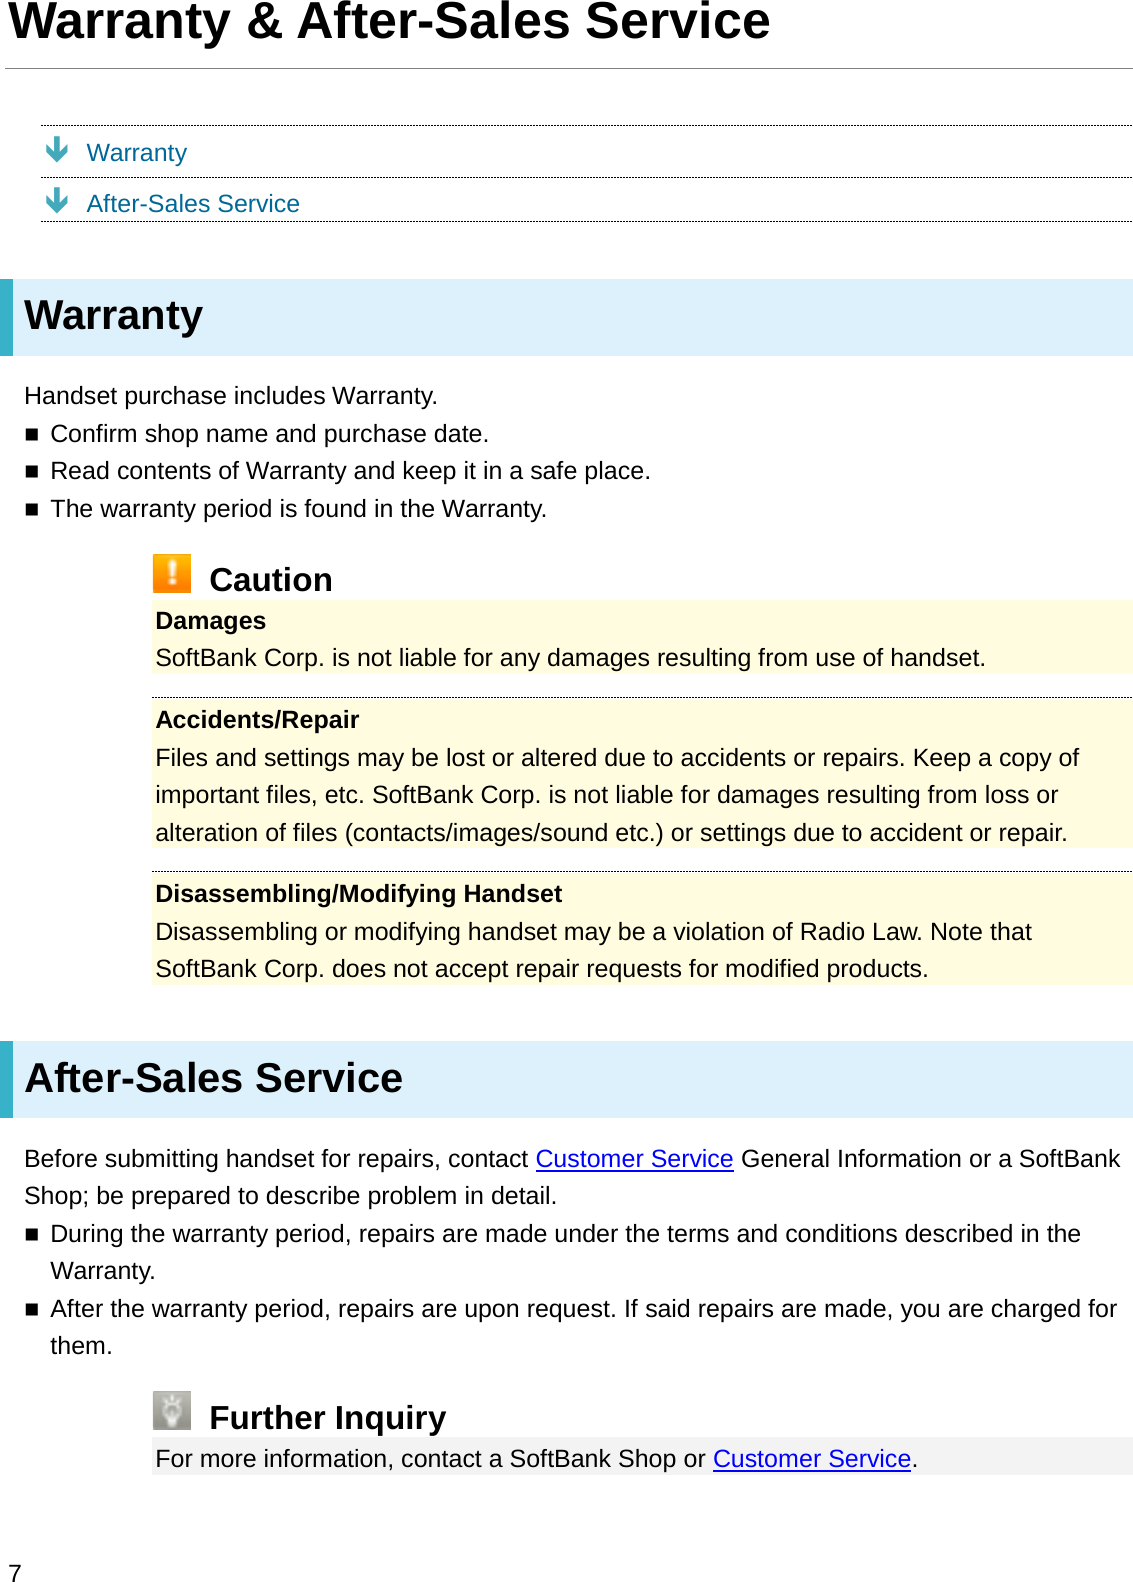 Warranty &amp; After-Sales ServiceÐWarrantyÐAfter-Sales ServiceWarrantyHandset purchase includes Warranty.Confirm shop name and purchase date.Read contents of Warranty and keep it in a safe place.The warranty period is found in the Warranty.CautionDamagesSoftBank Corp. is not liable for any damages resulting from use of handset.Accidents/RepairFiles and settings may be lost or altered due to accidents or repairs. Keep a copy of important files, etc. SoftBank Corp. is not liable for damages resulting from loss or alteration of files (contacts/images/sound etc.) or settings due to accident or repair.Disassembling/Modifying HandsetDisassembling or modifying handset may be a violation of Radio Law. Note that SoftBank Corp. does not accept repair requests for modified products.After-Sales ServiceBefore submitting handset for repairs, contact Customer Service General Information or a SoftBank Shop; be prepared to describe problem in detail.During the warranty period, repairs are made under the terms and conditions described in the Warranty.After the warranty period, repairs are upon request. If said repairs are made, you are charged for them.Further InquiryFor more information, contact a SoftBank Shop or Customer Service.7